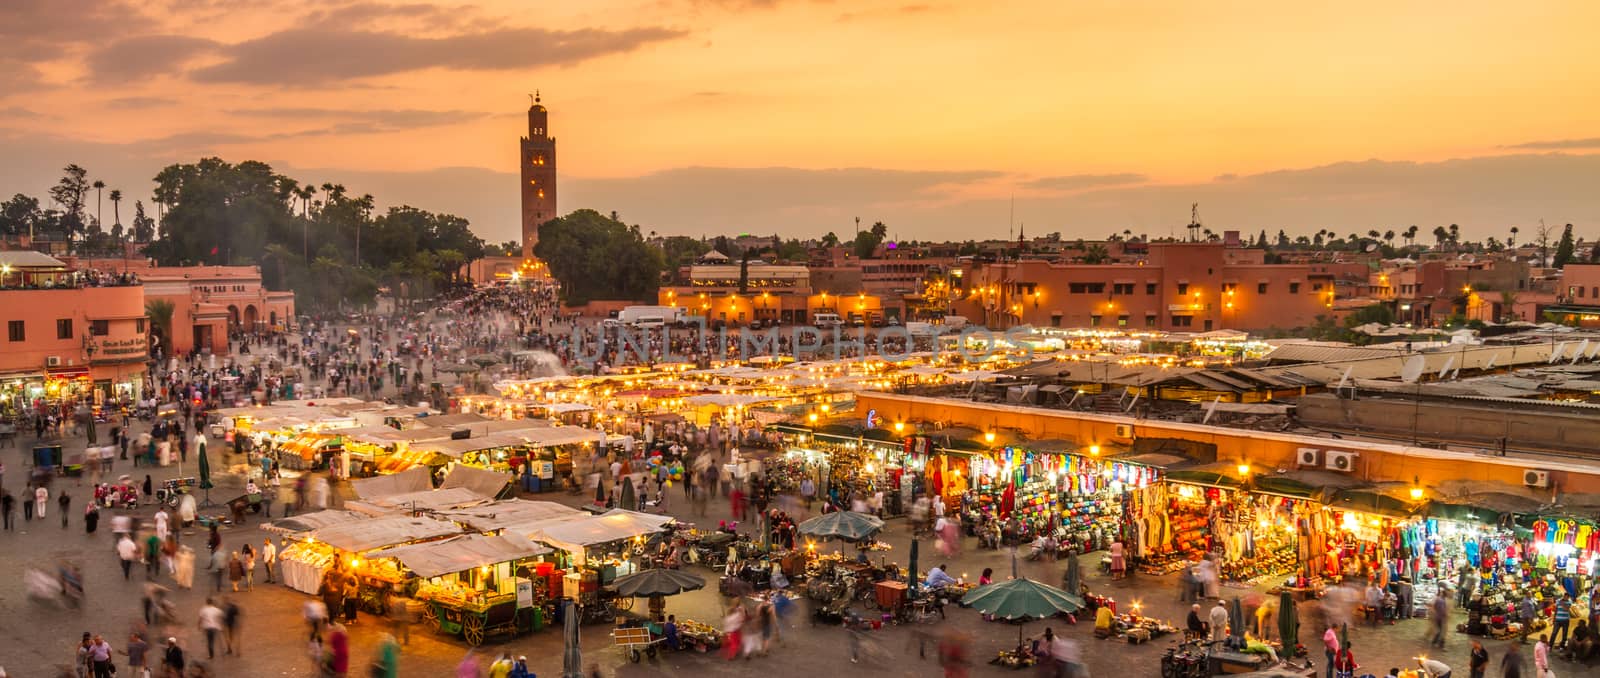 Jamaa el Fna market square in sunset, Marrakesh, Morocco, north Africa. by kasto